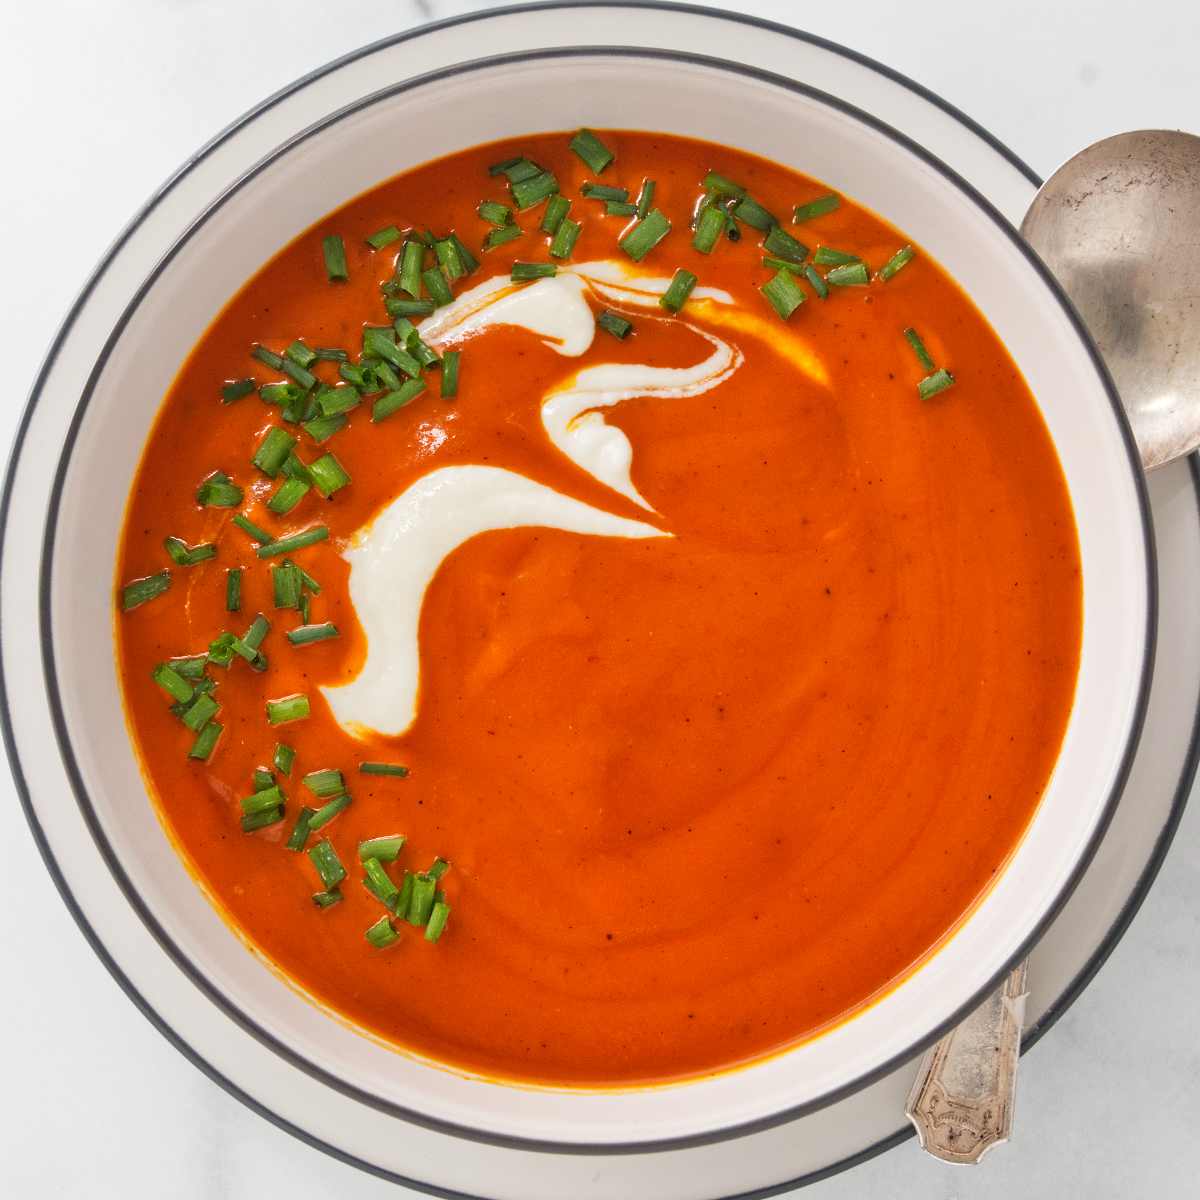 A bowl filled with roasted red pepper soup and garnished with cream and chives.